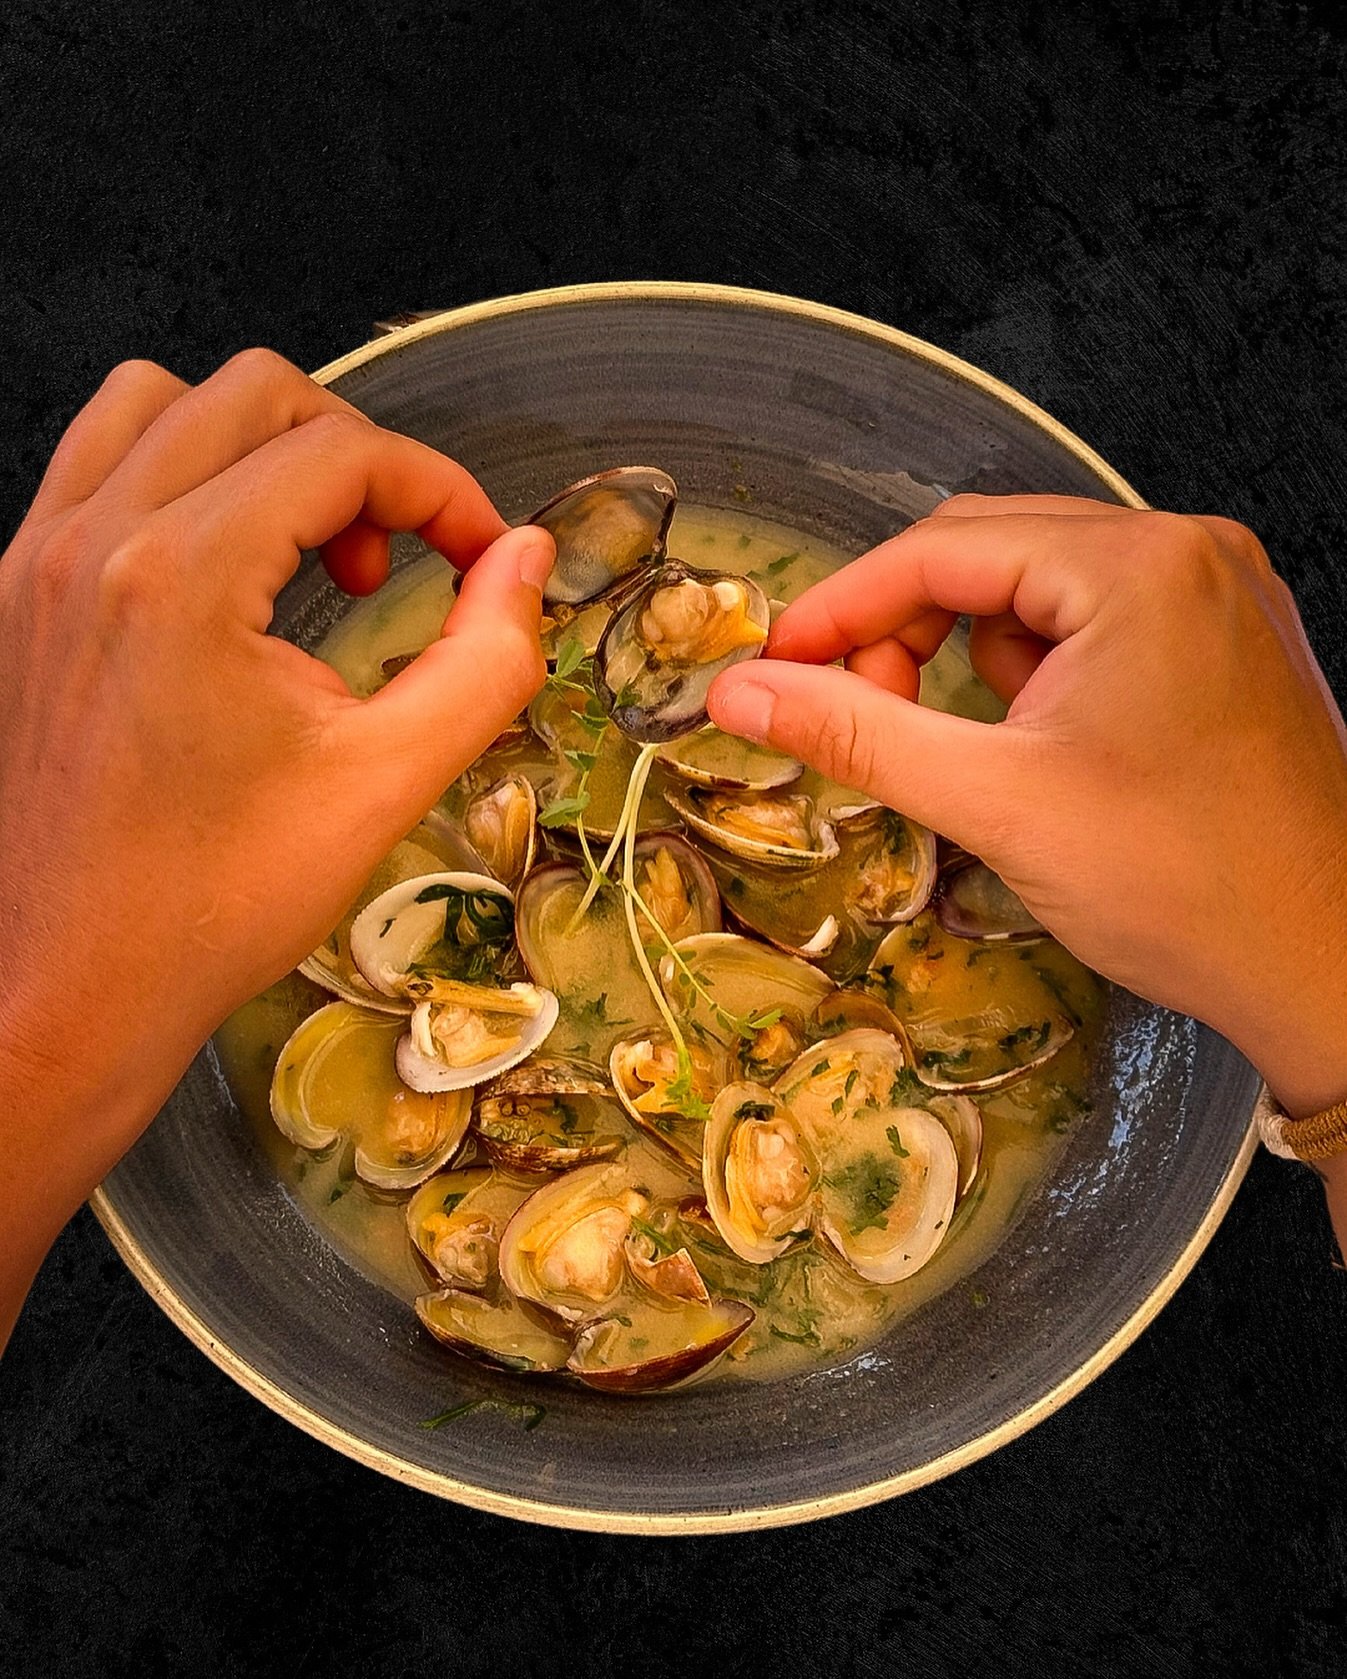 Allow us to present one of our most sought-after hot starters, featuring a tantalizing sauce brimming with personality:

✨ Saut&eacute;ed clams, lovingly simmered in a cocotte with a medley of olive oil, garlic, parsley, and white wine.

Ever indulge